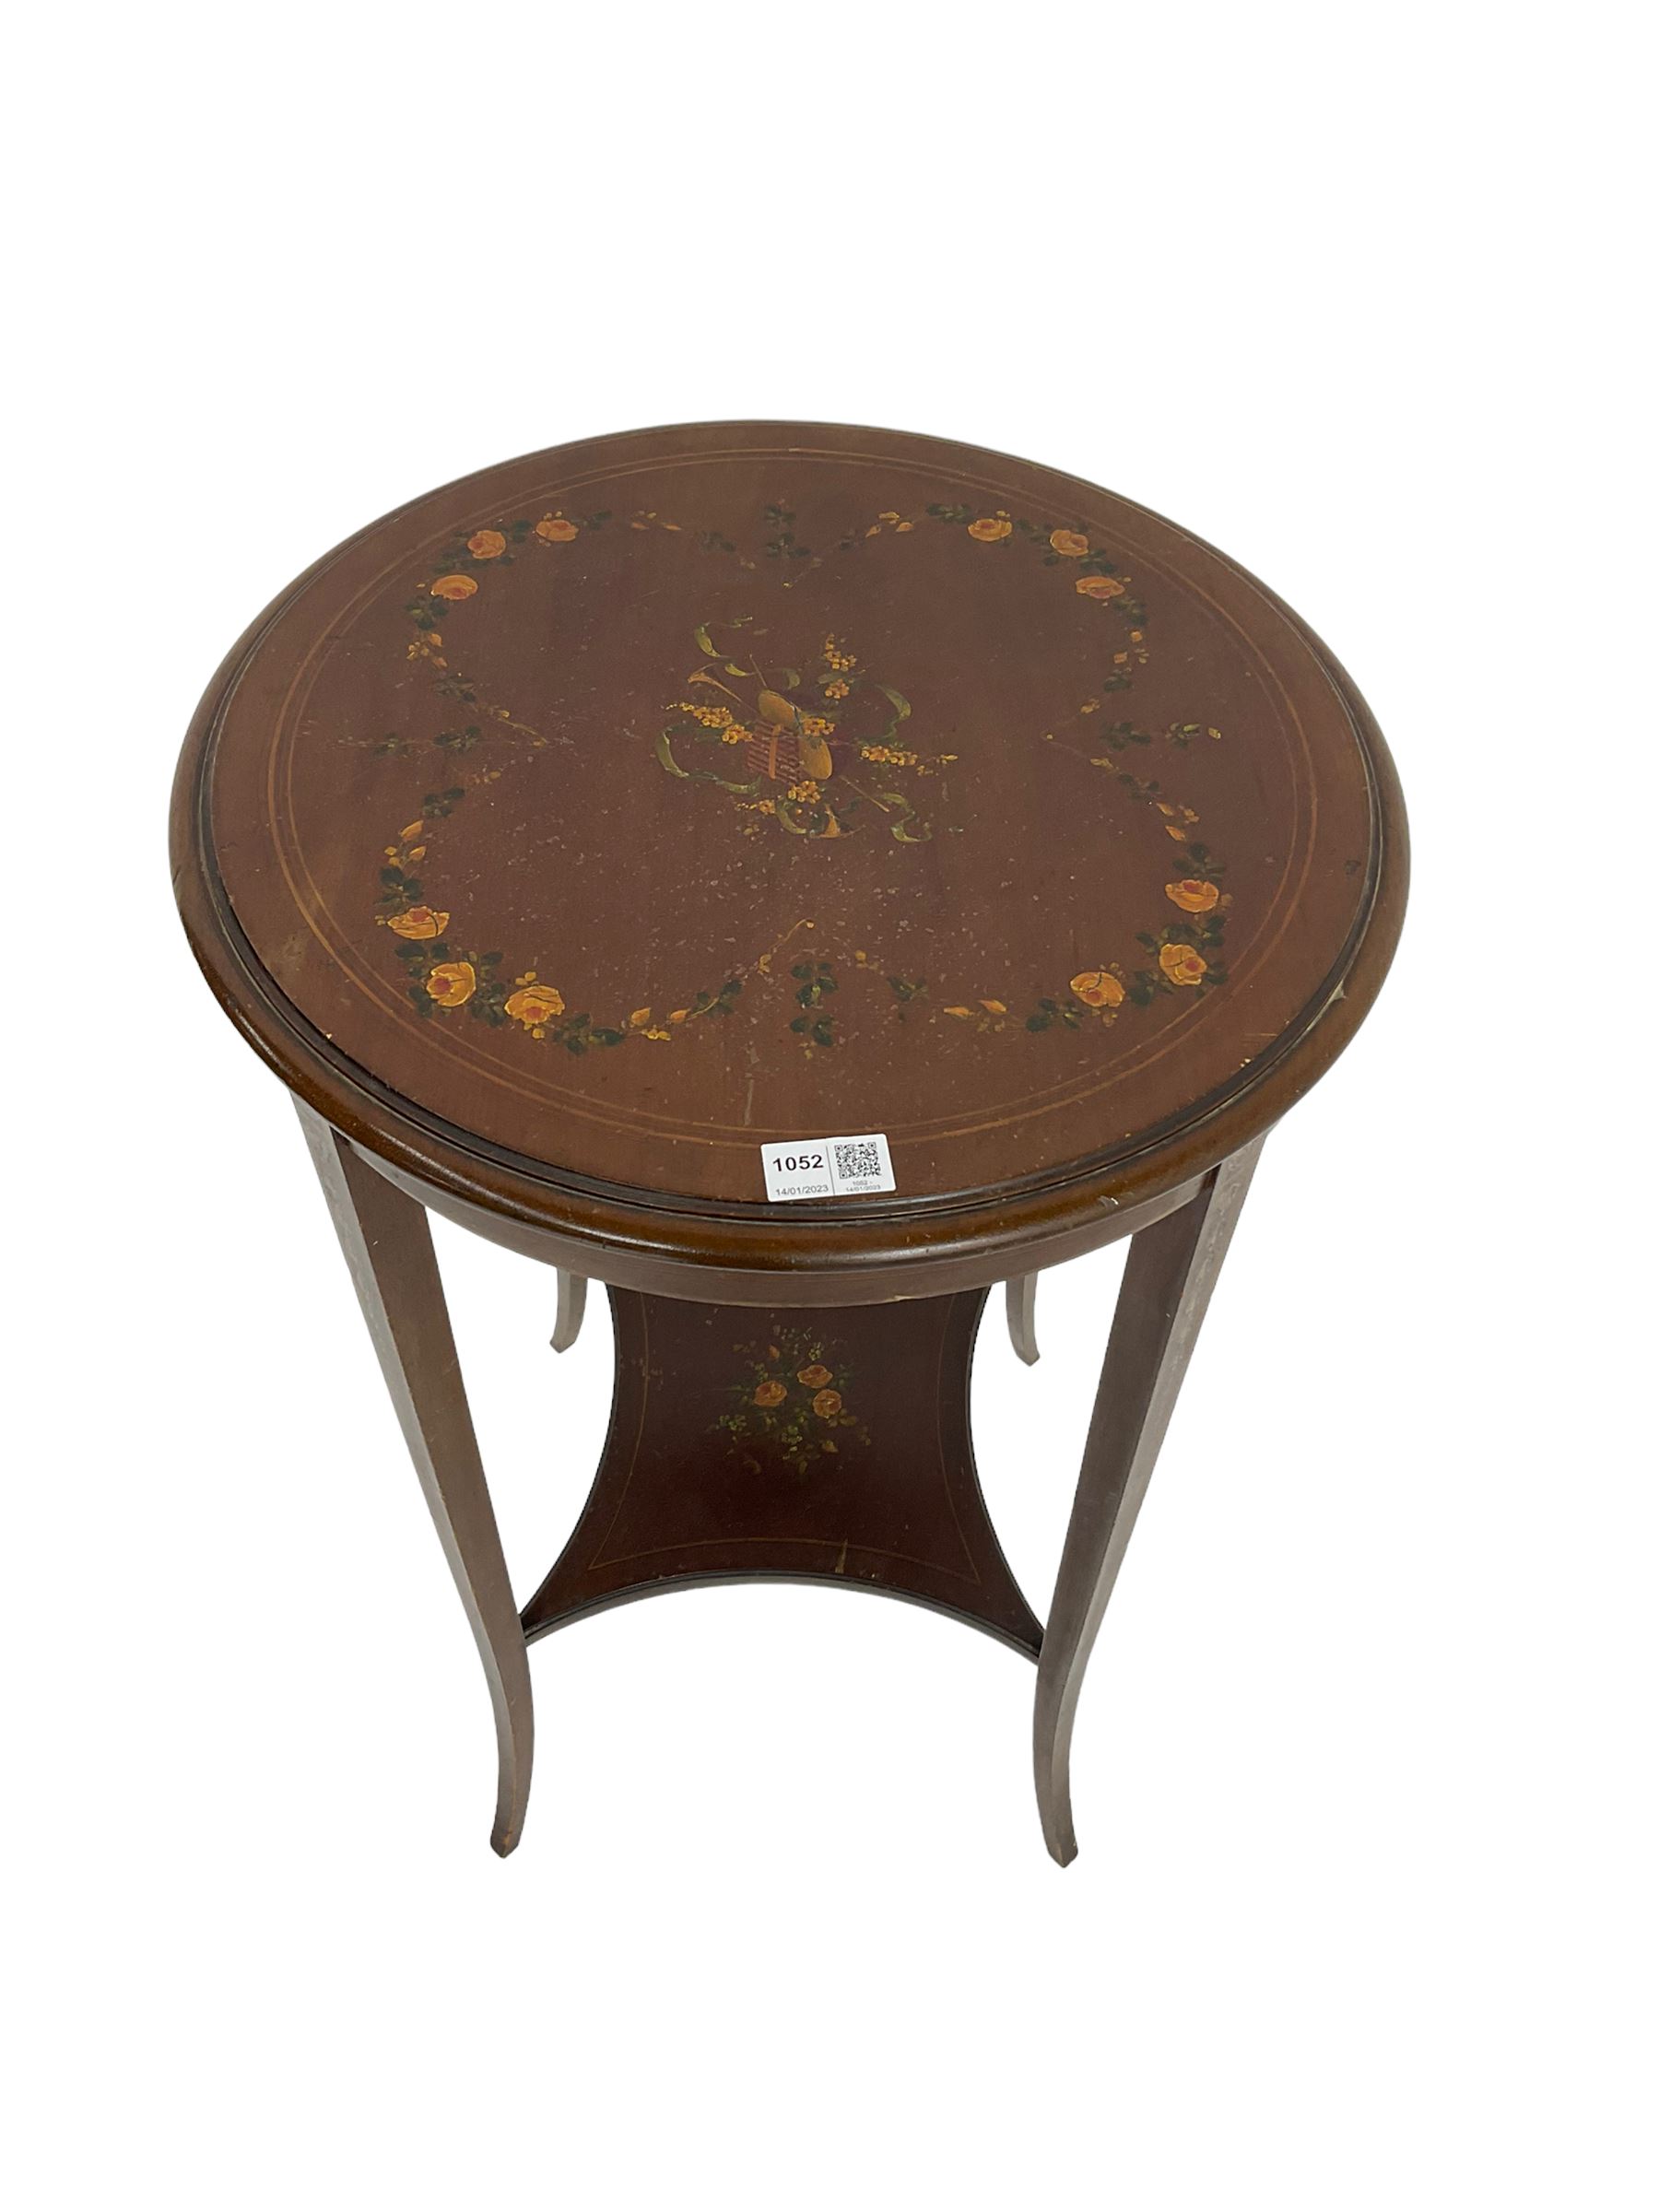 Greenwood and Sons York - early 20th century mahogany side or lamp table - Image 5 of 6